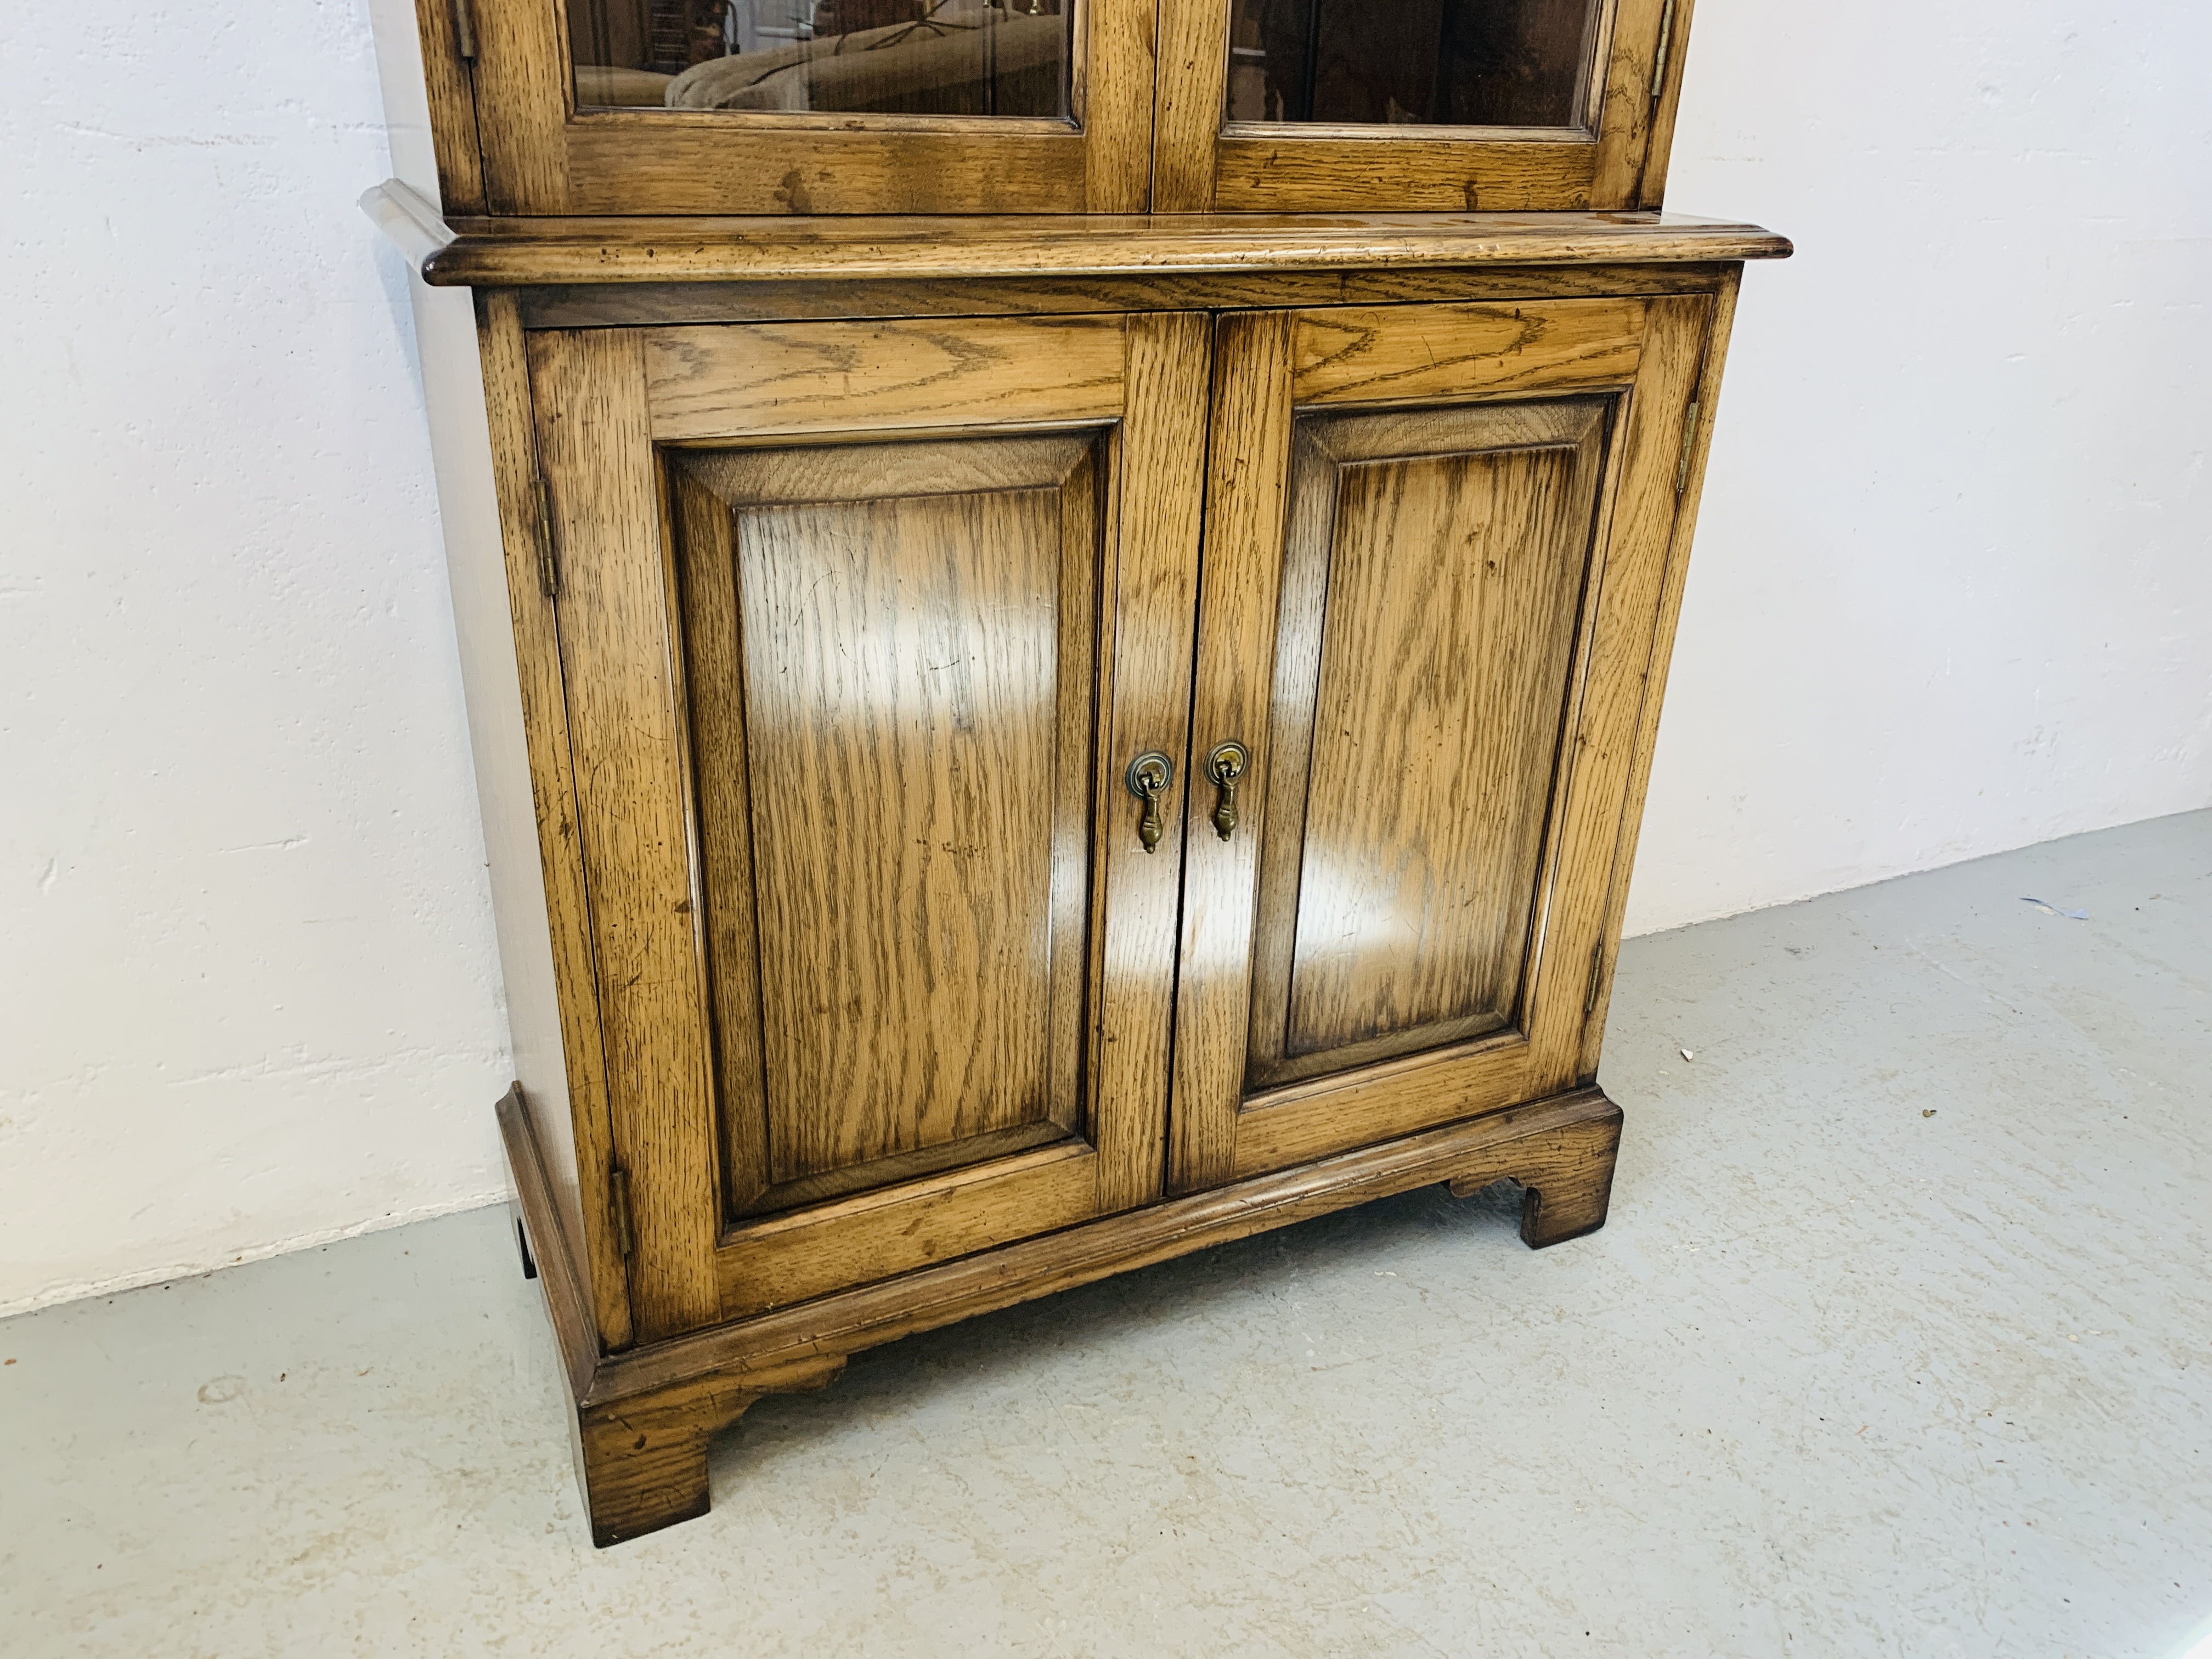 A QUALITY REPRODUCTION OAK BOOKCASE WITH CUPBOARD BASE BY DAVID NOTTAGE CABINET MAKER - W 75cm. - Image 4 of 14